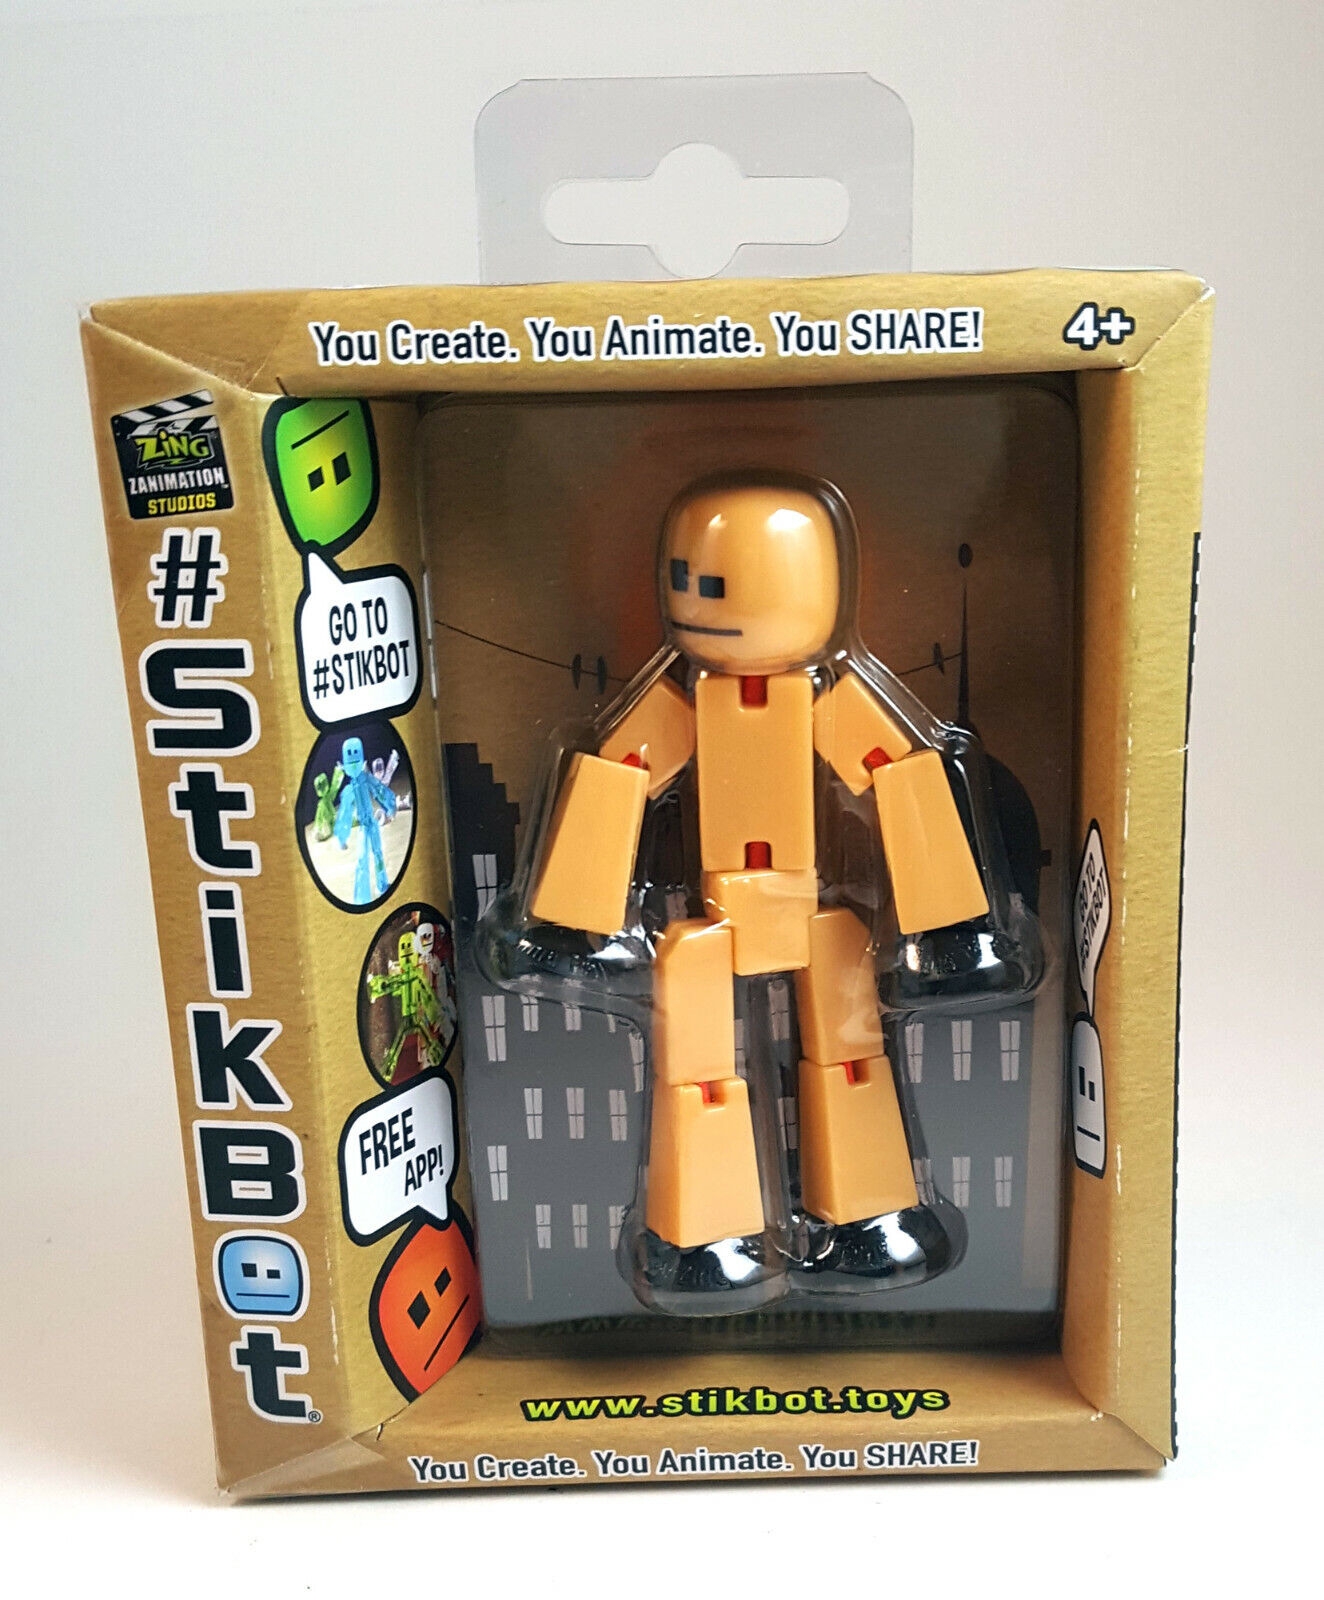 STIKBOT Peach Create your own Animate You share Free Shipping BRAND NEW  8983106160 | eBay